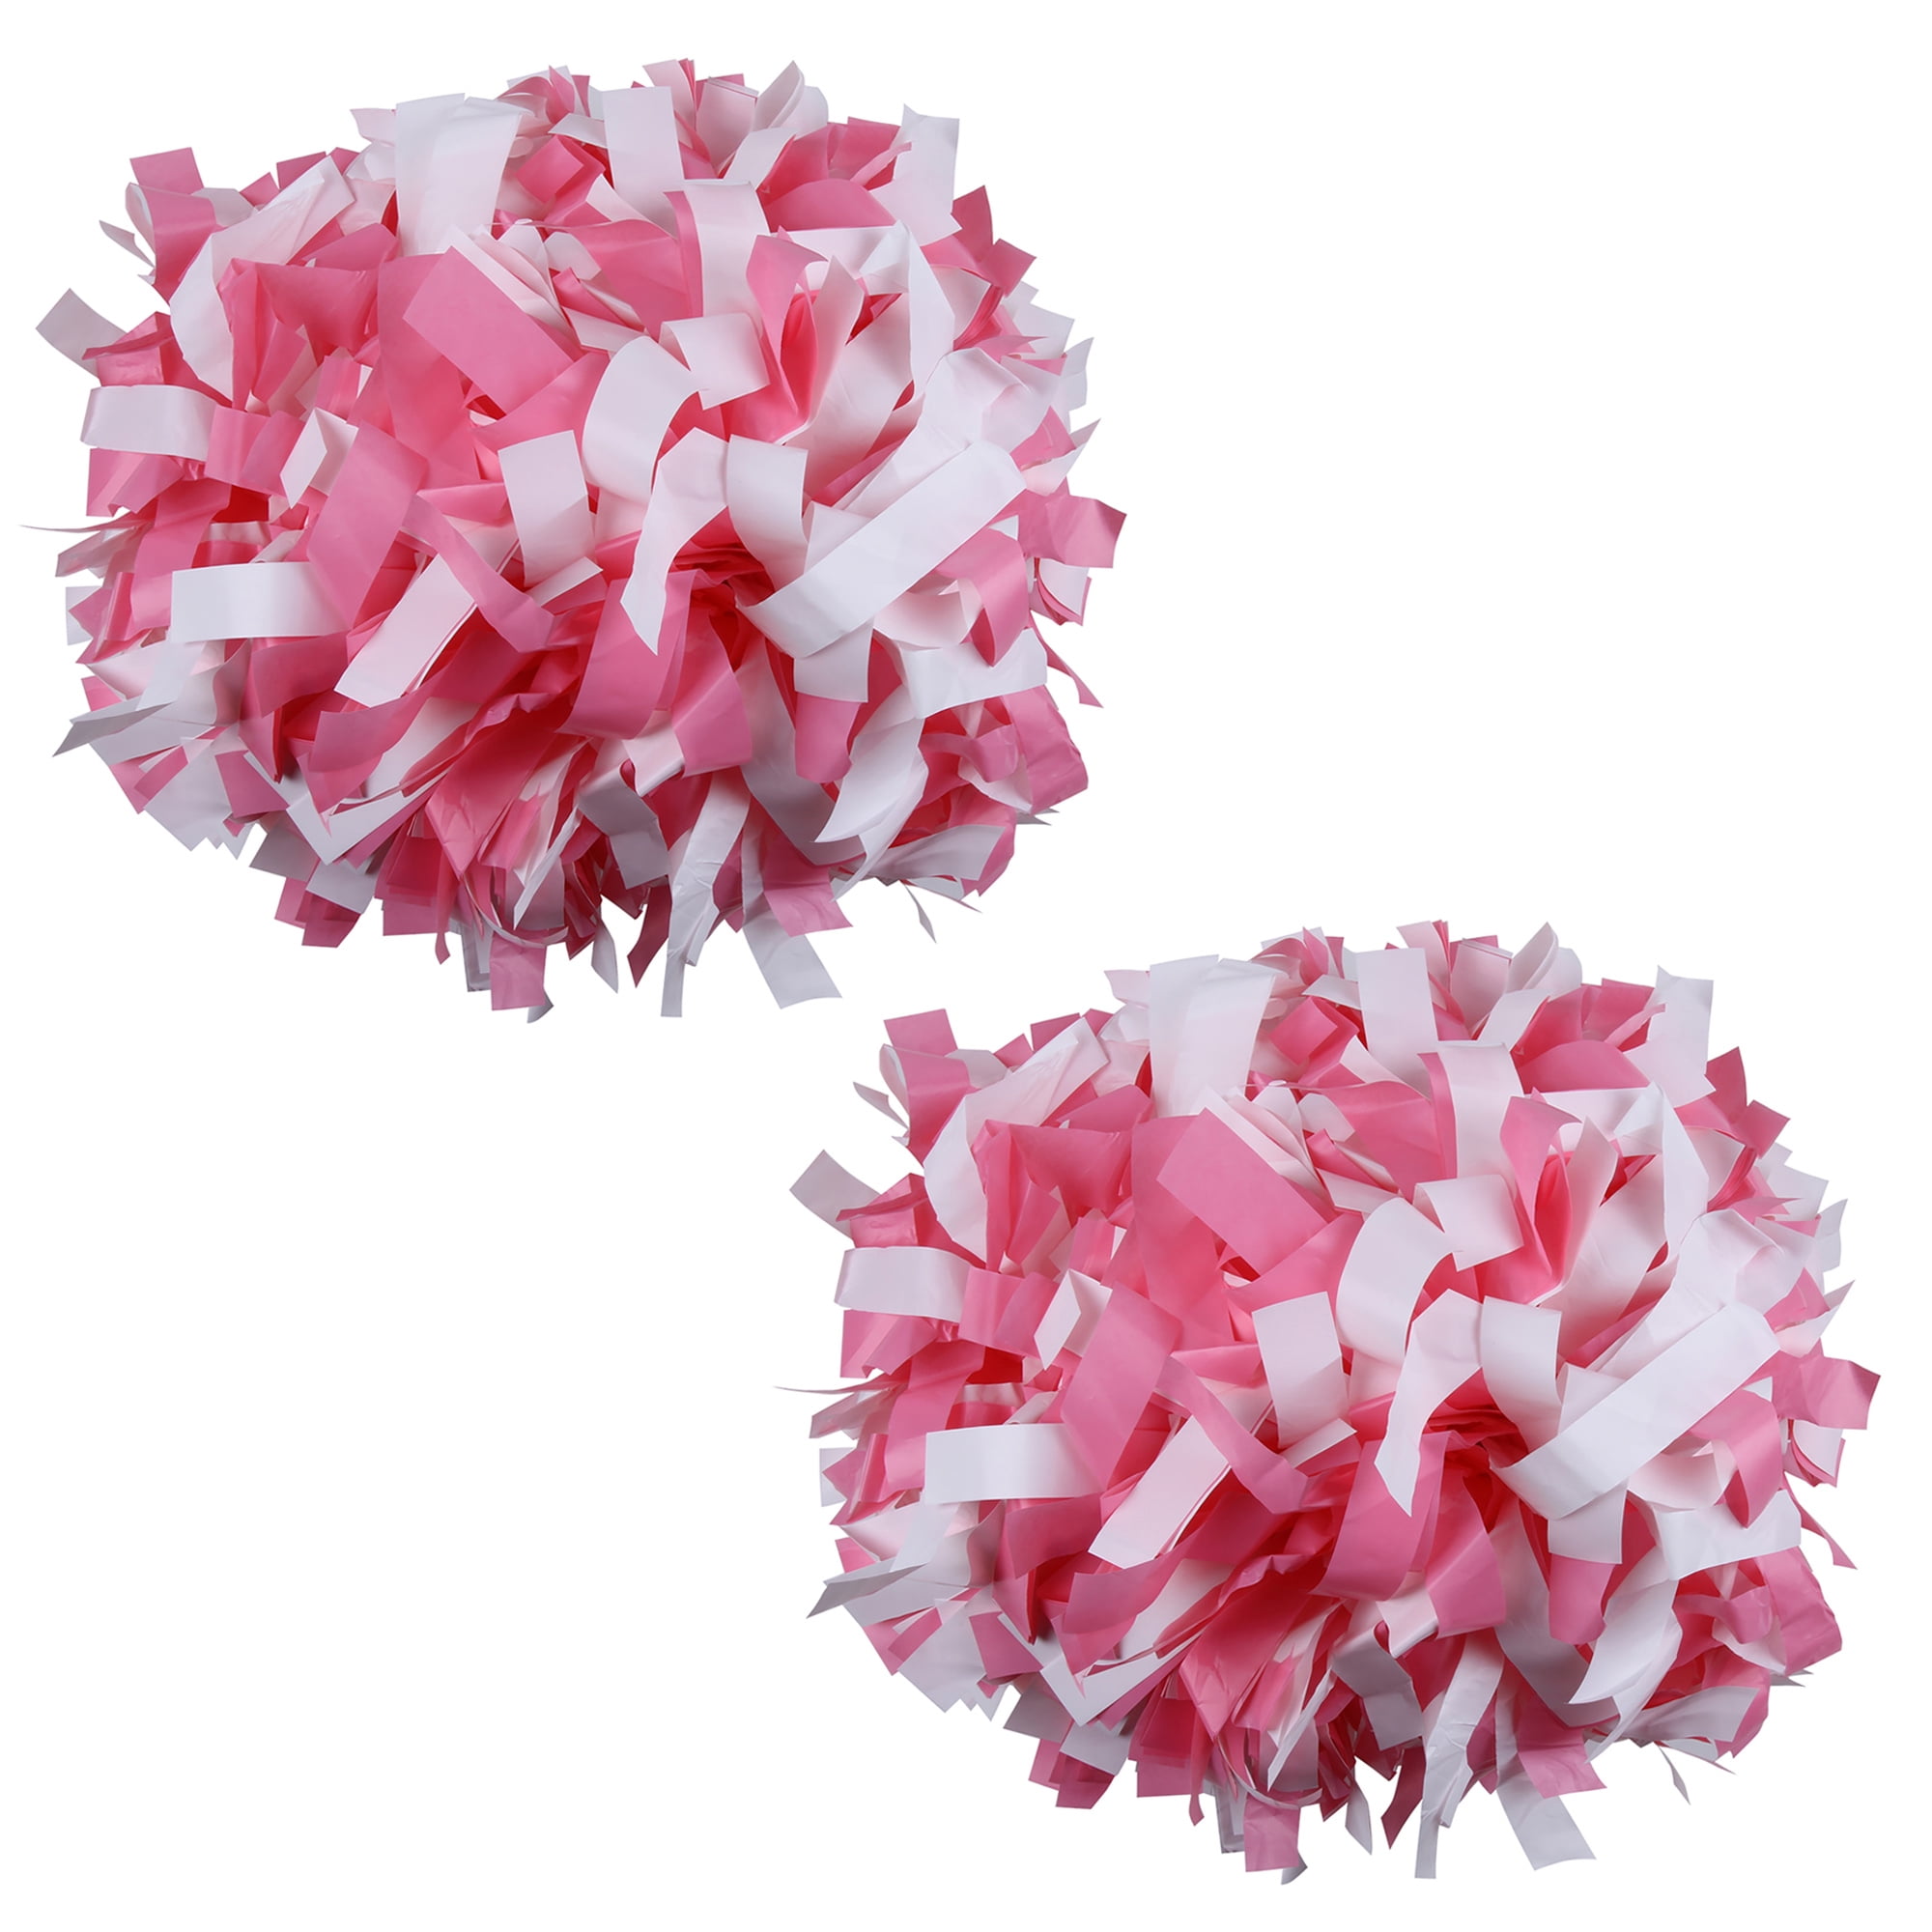 New and used Cheerleading Pom Poms for sale, Facebook Marketplace